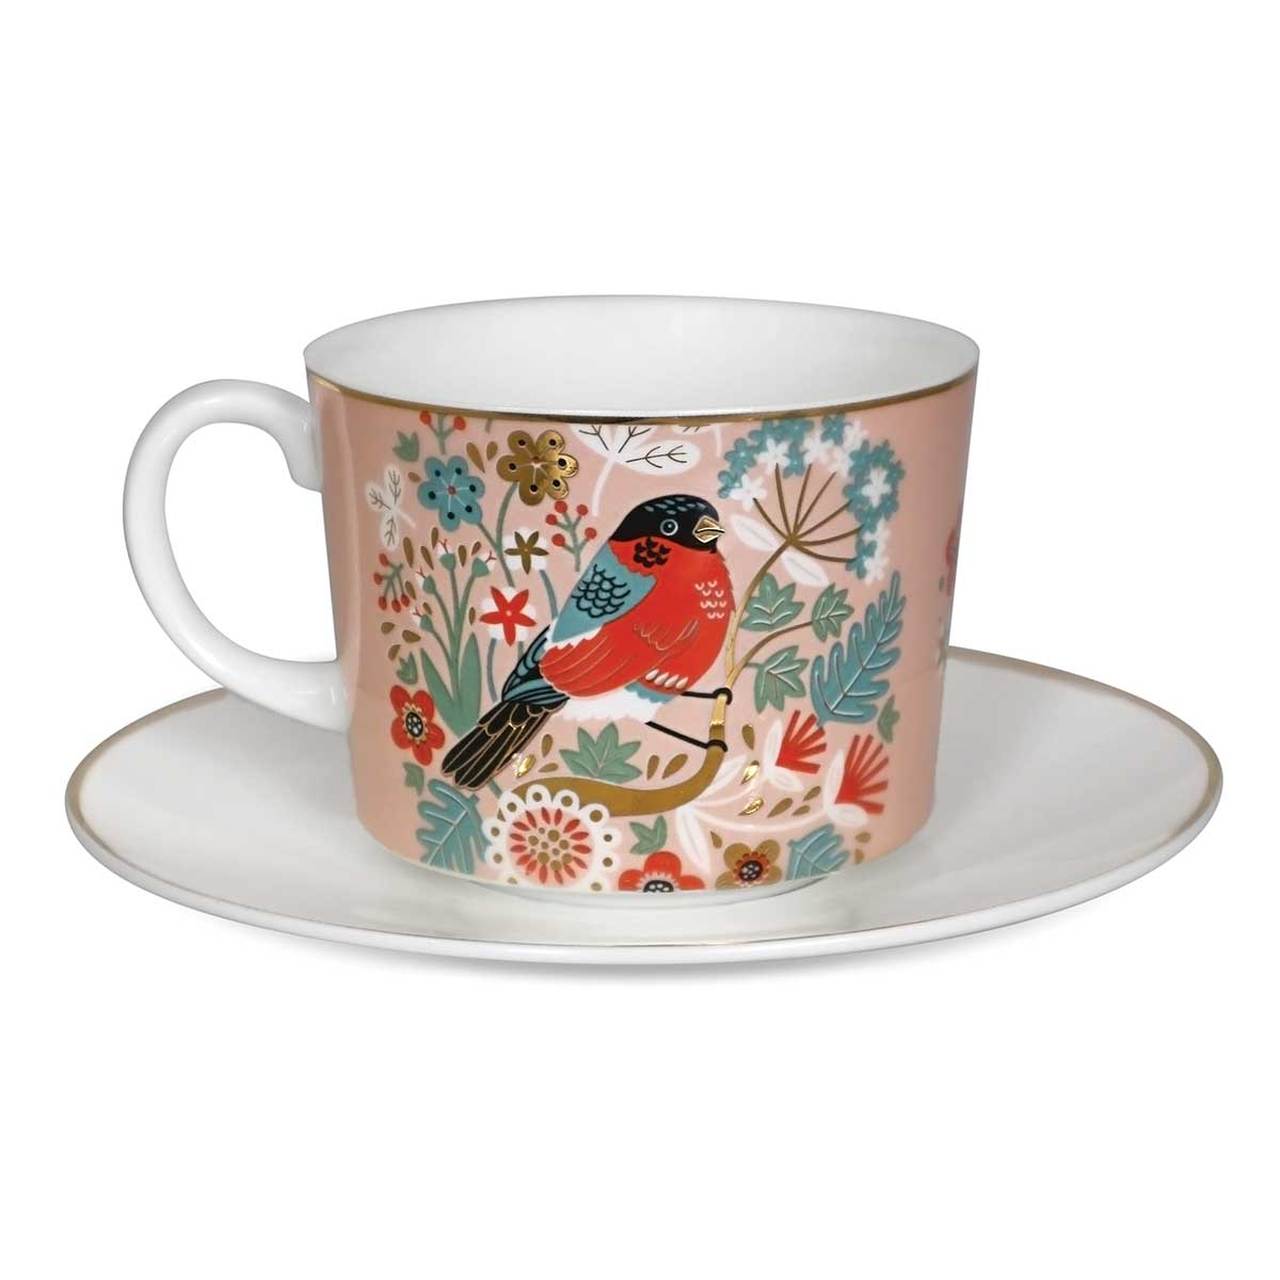 Tipperary Birdy Set of 2 Bullfinch & Goldfinch Cappuccino Cups  The Birdy Collection is a series of 6 exclusively commissioned illustrations inspired by native Irish birds; Bullfinch, Goldfinch, Blue tit, Greenfinch, Kingfisher and Robin.